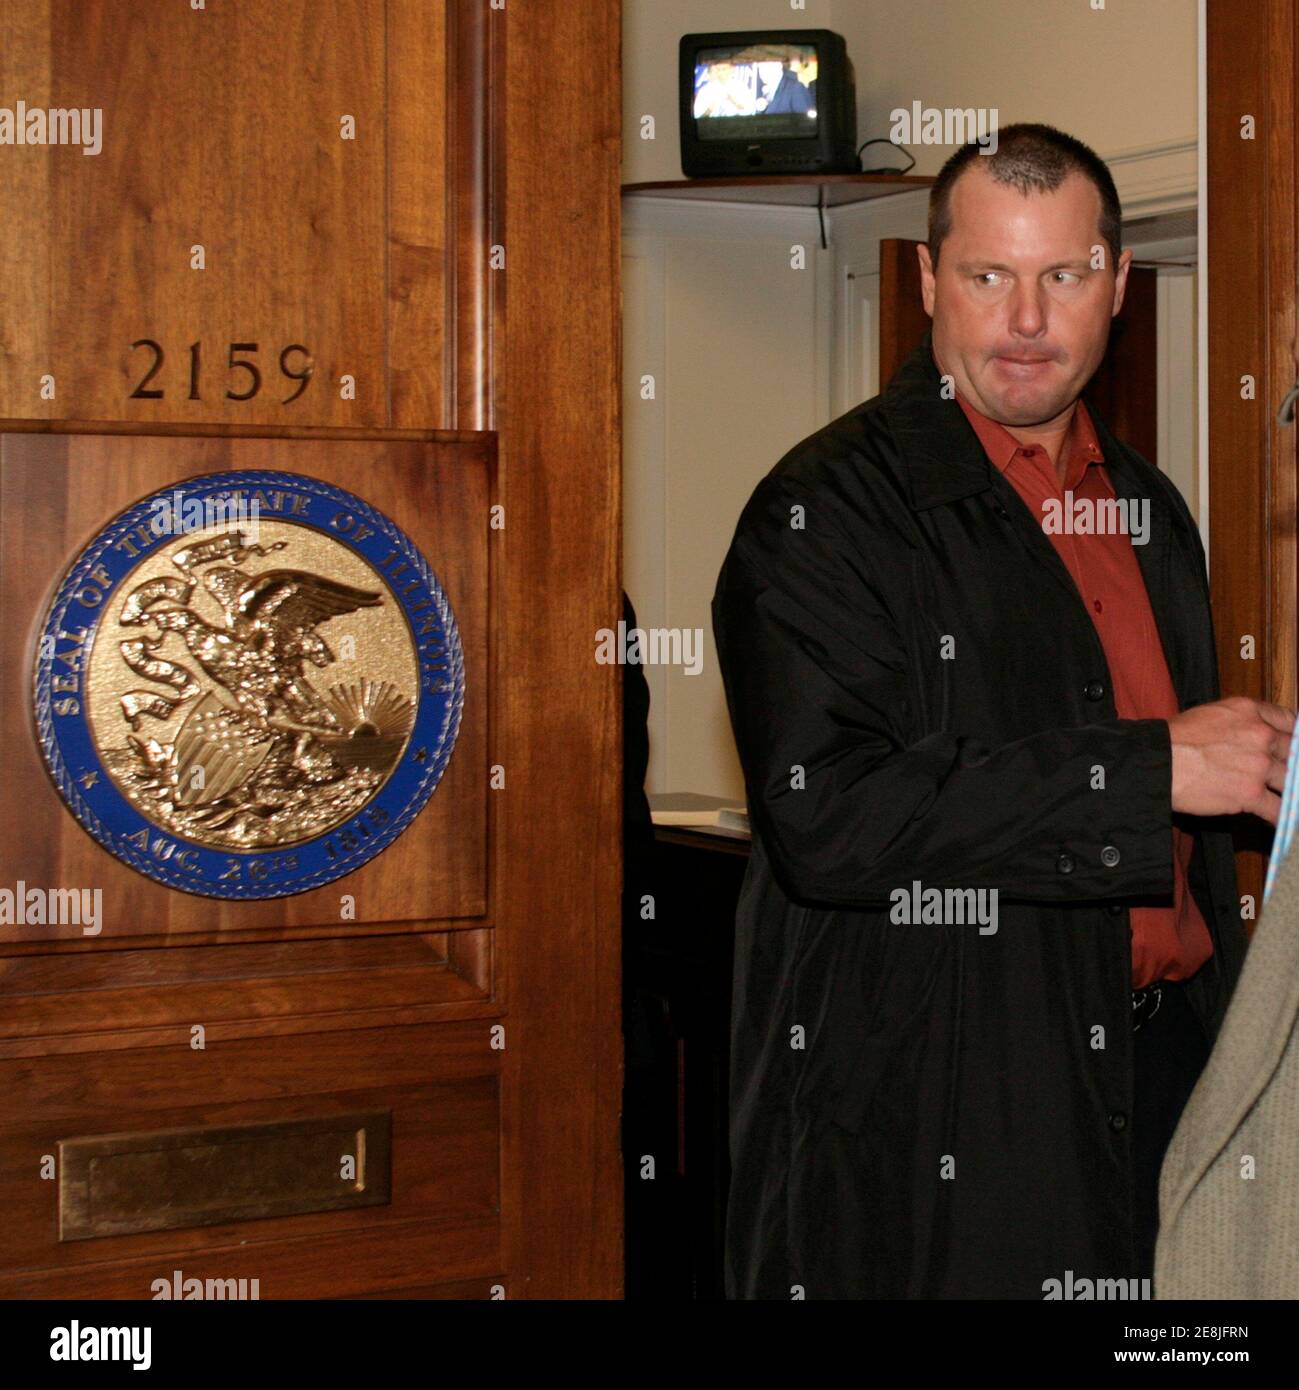 Major League Baseball pitcher Roger Clemens leaves after a meeting with Rep. Danny Davis (D-IL) on Capitol Hill in Washington February 8, 2008.  REUTERS/Yuri Gripas (UNITED STATES) Stock Photo